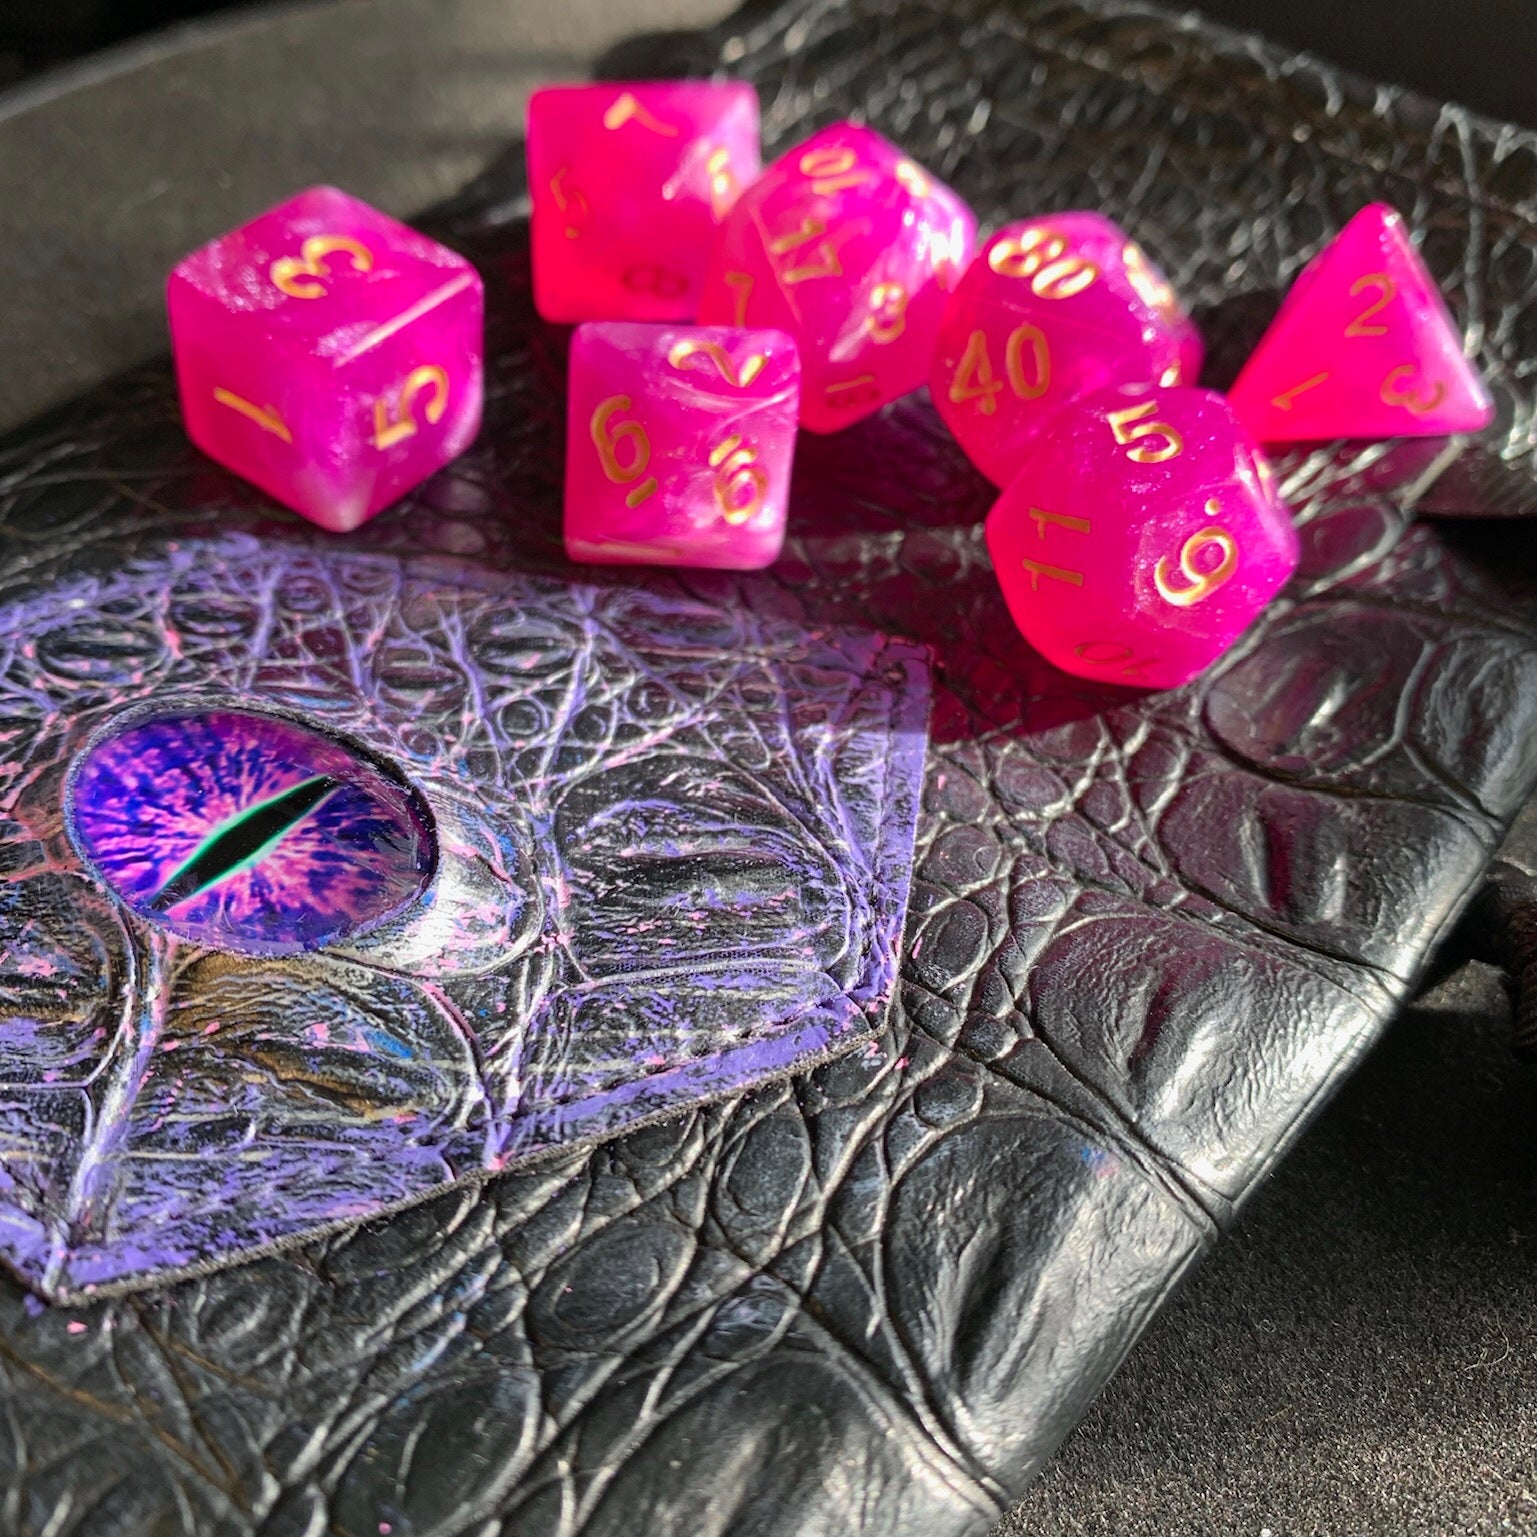 Eldritch Magenta Purple DnD 7 Dice Set And Hand Painted Dragon Eye Pouch Set In Vegan Leather - Darkmoon Fayre